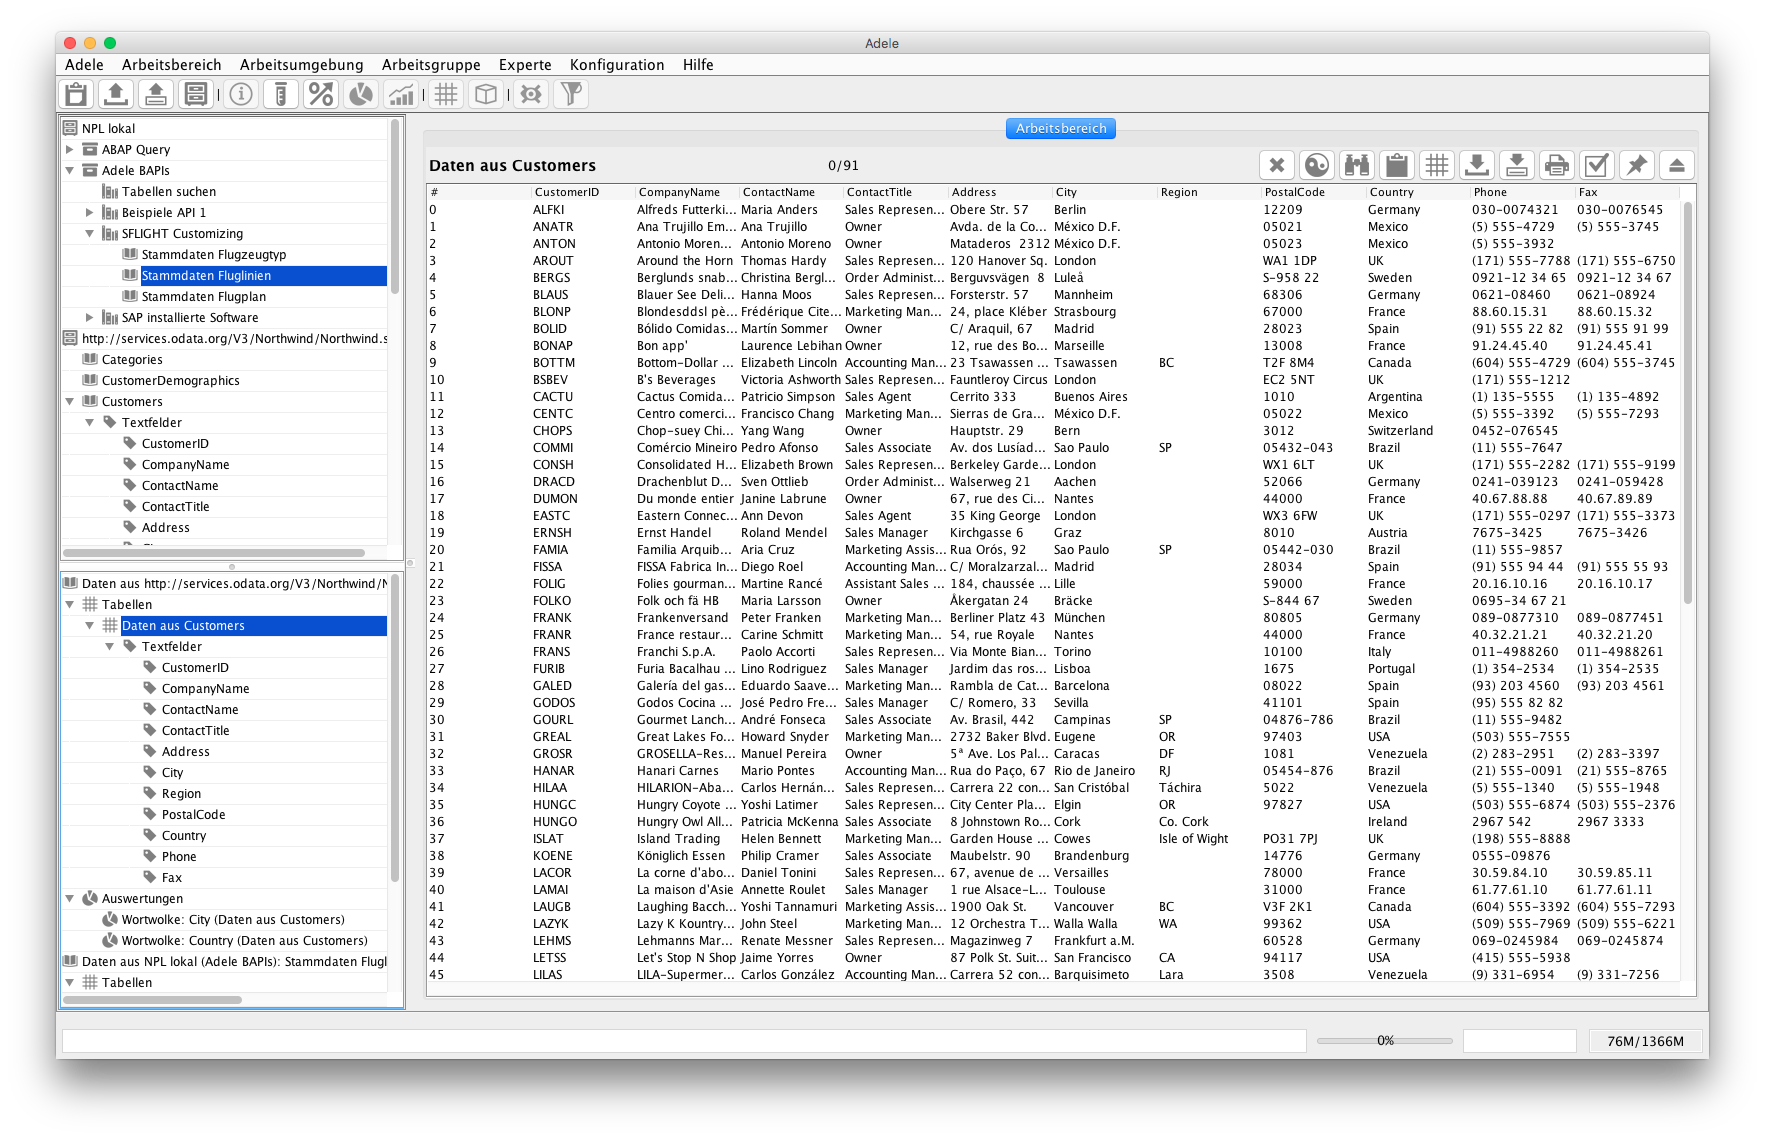 excel for mac odata